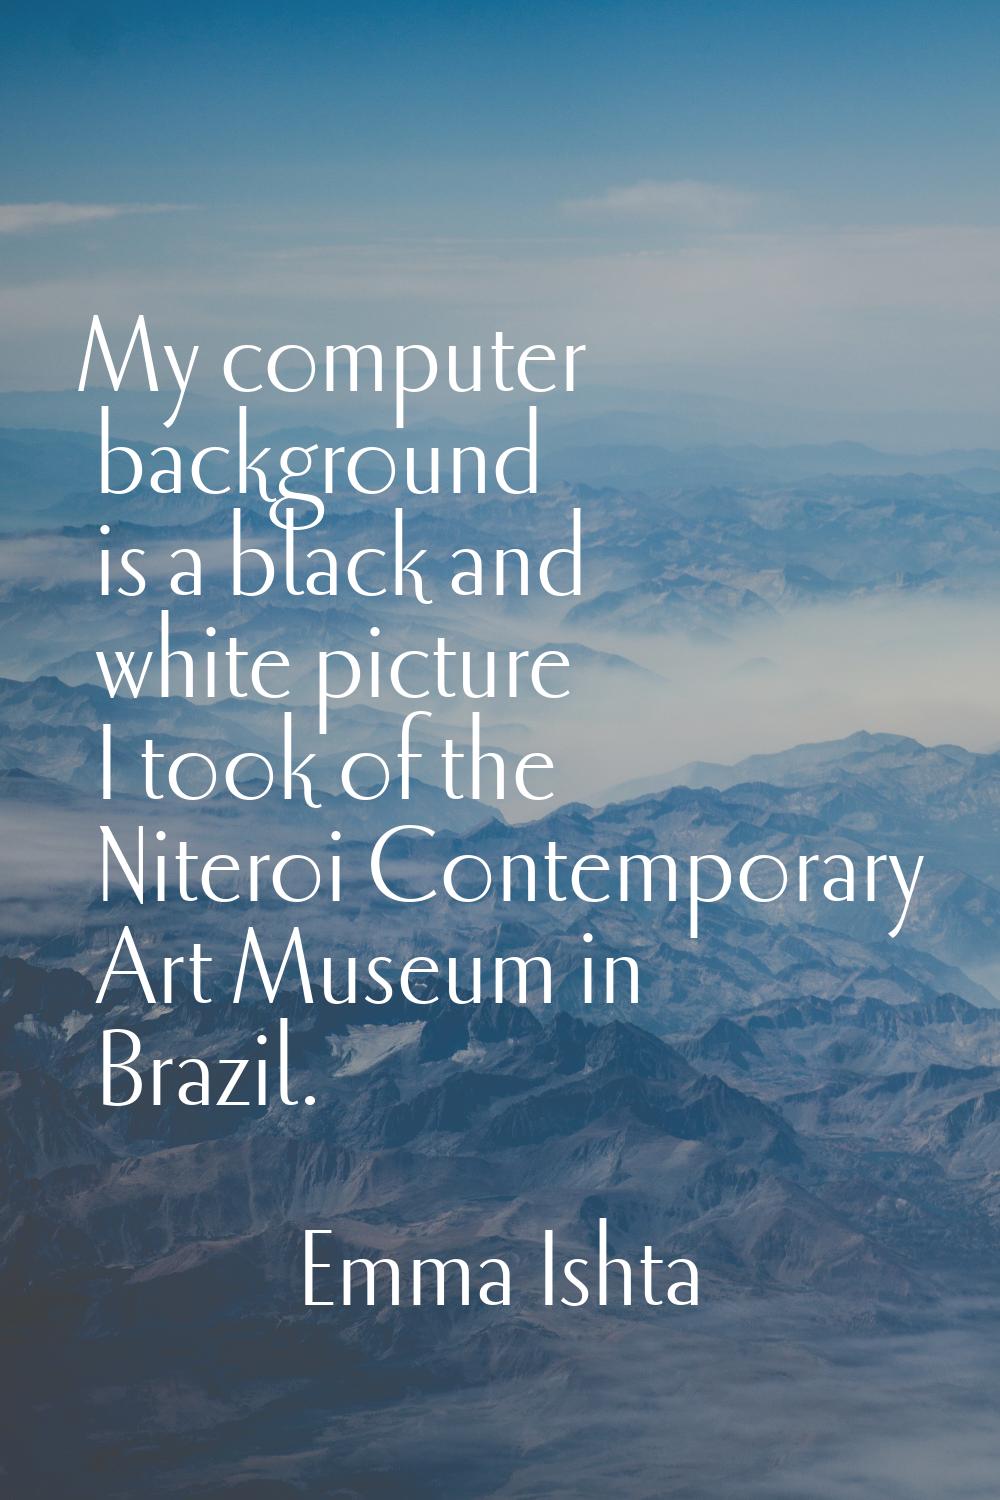 My computer background is a black and white picture I took of the Niteroi Contemporary Art Museum i